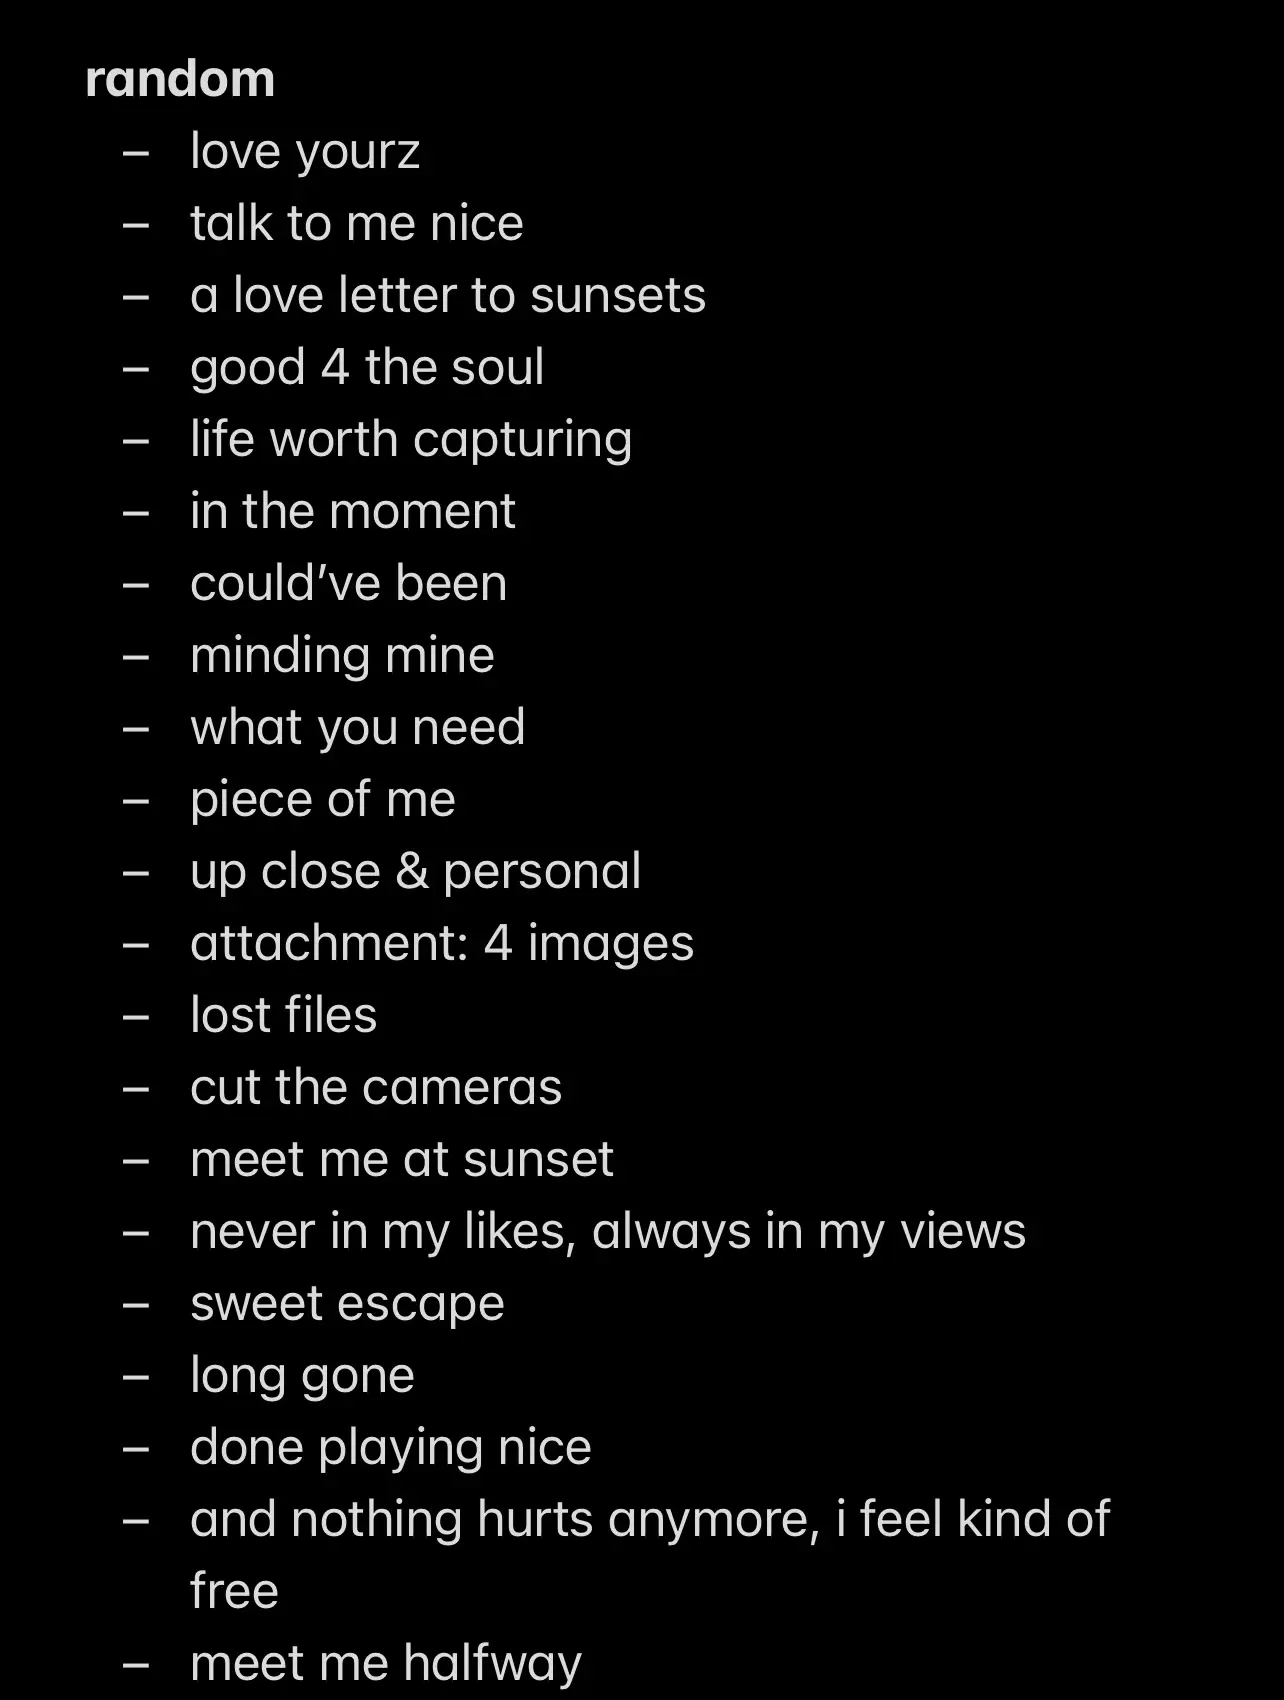  A list of random things to say to someone.